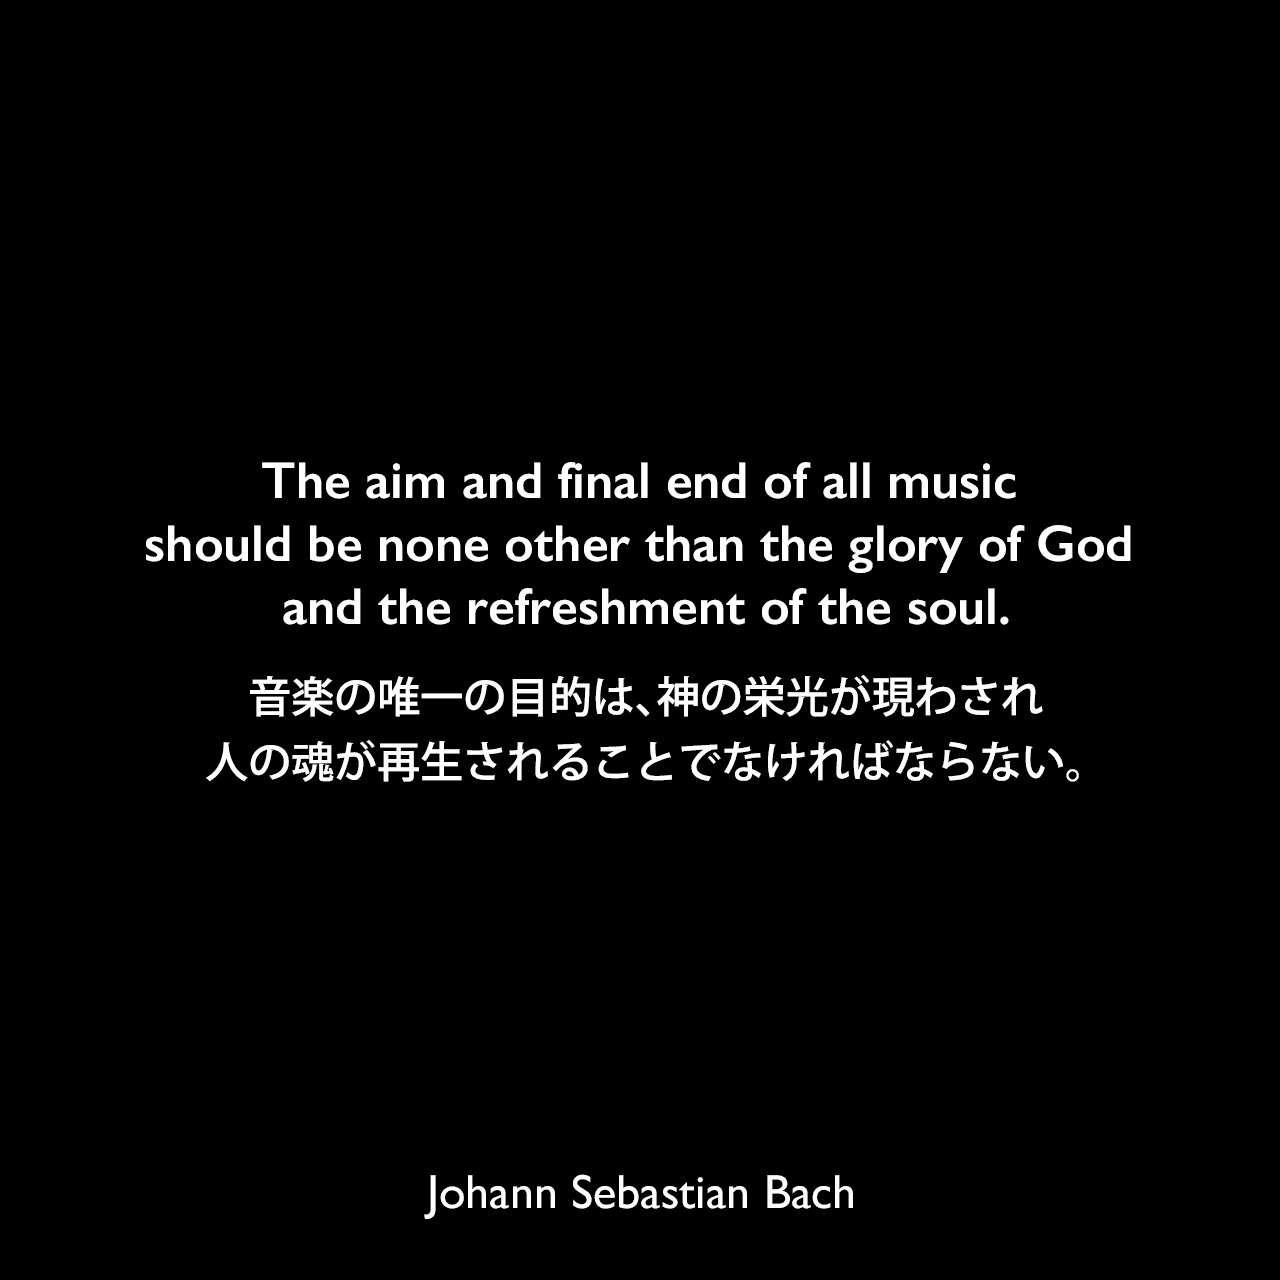 The aim and final end of all music should be none other than the glory of God and the refreshment of the soul.音楽の唯一の目的は、神の栄光が現わされ、人の魂が再生されることでなければならない。Johann Sebastian Bach